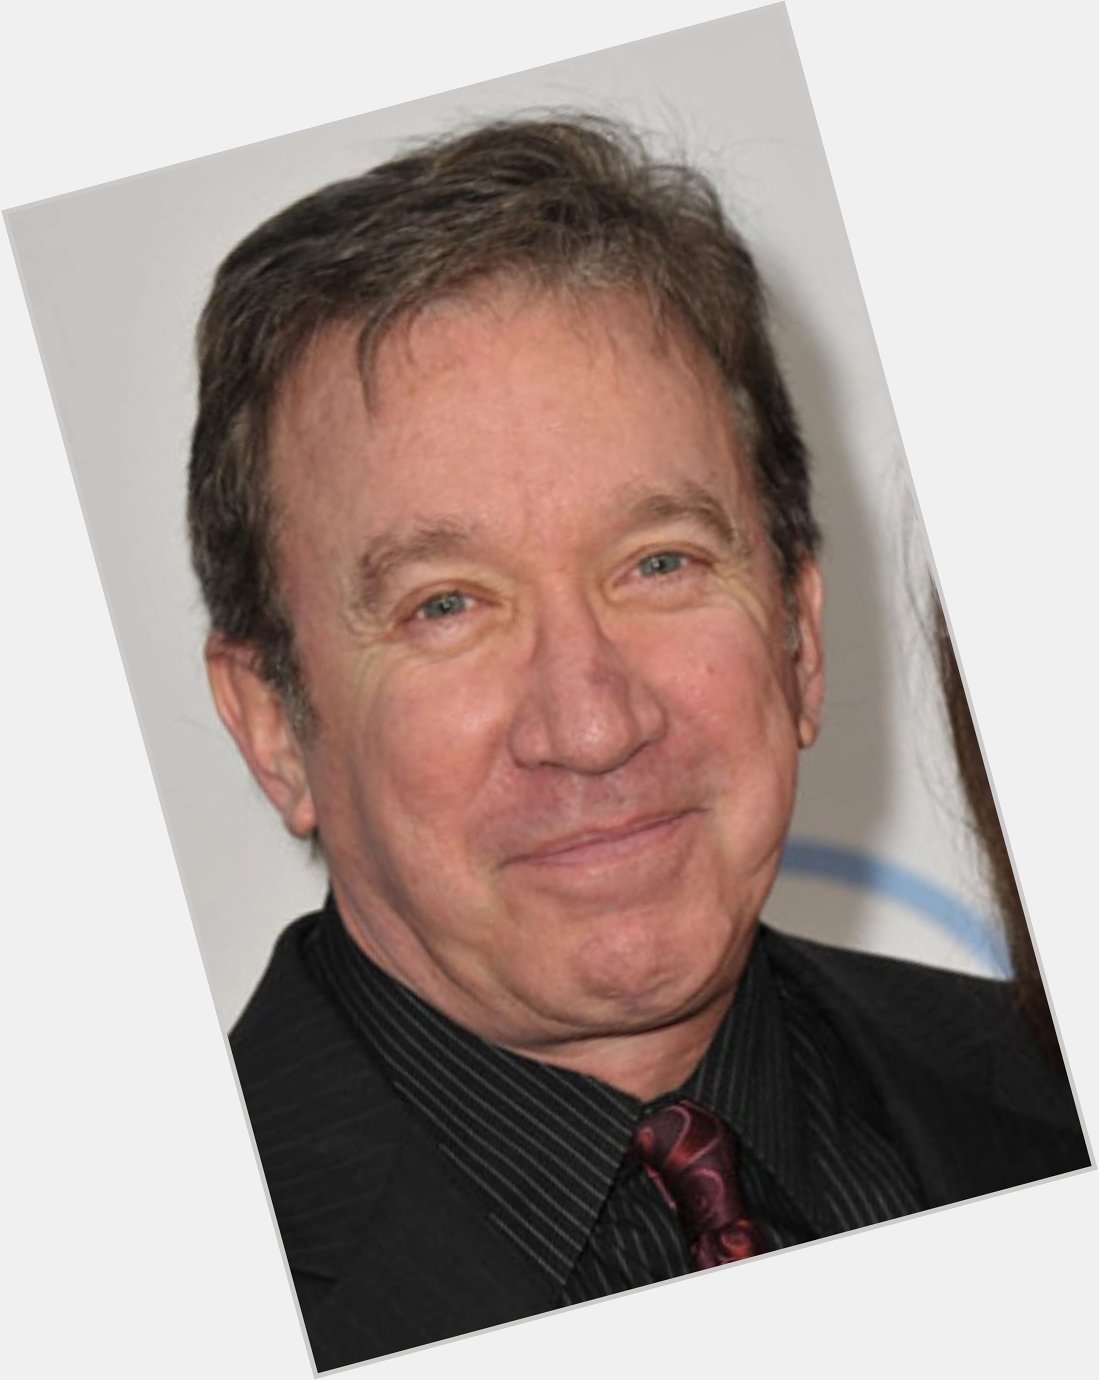 Happy 70th birthday to Tim Allen, the voice of Buzz Lightyear from Toy Story. 